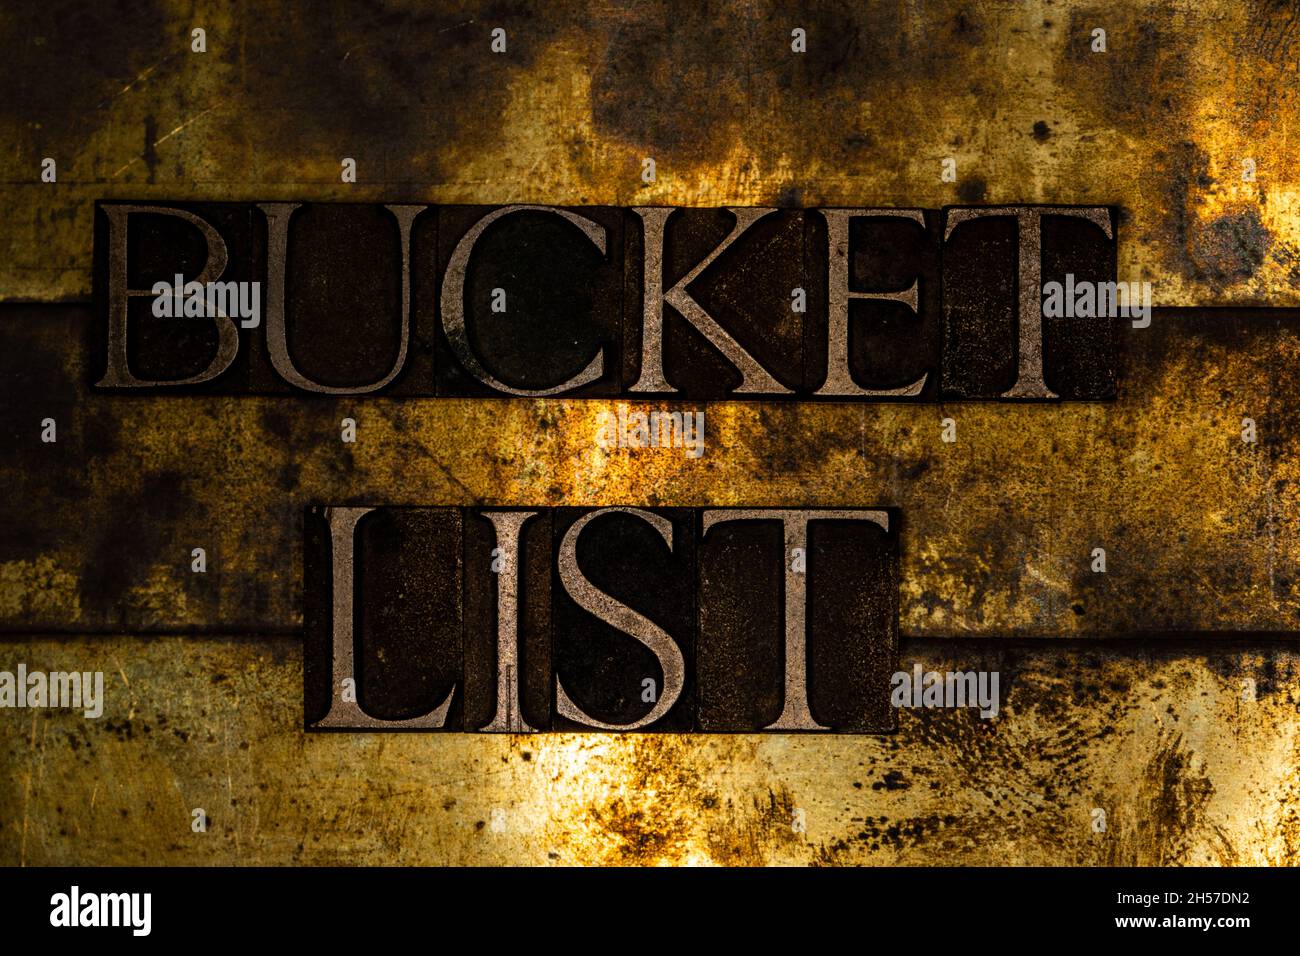 Bucket List text message on textured grunge copper and vintage gold background Stock Photo